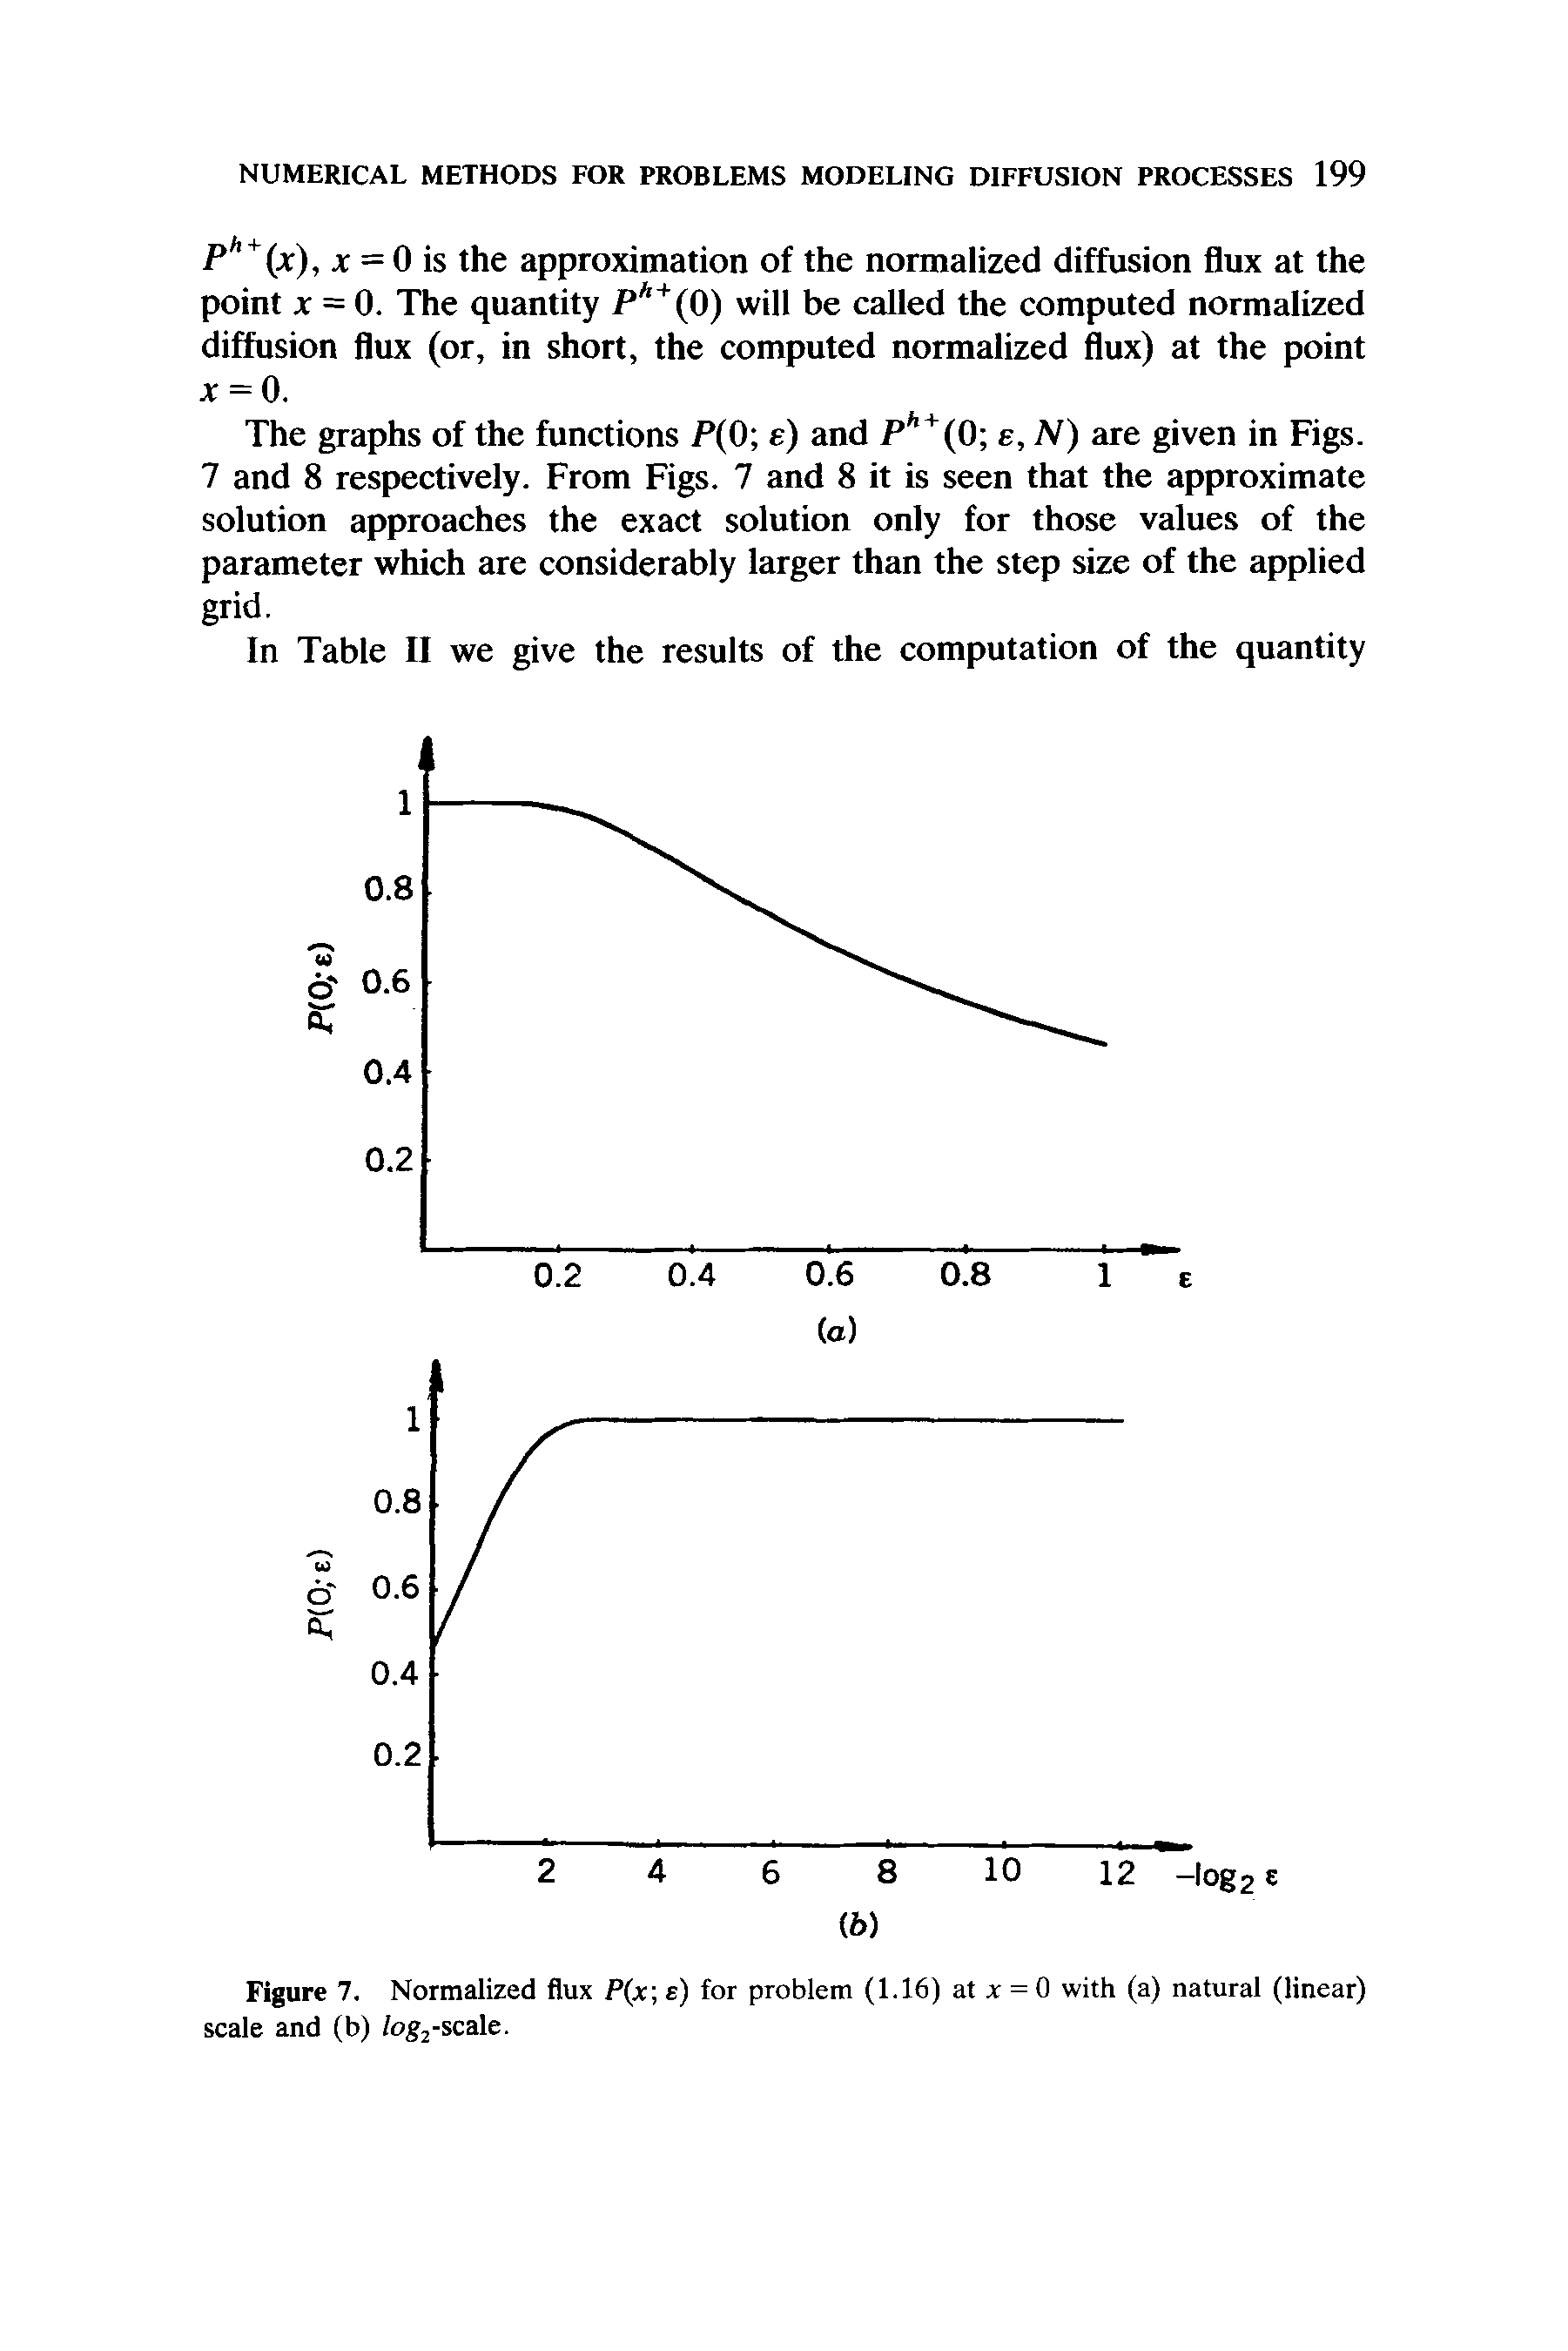 Figure 7. Normalized flux P(x e) for problem (1.16) at x = 0 with (a) natural (linear) scale and (b) togj-scale.